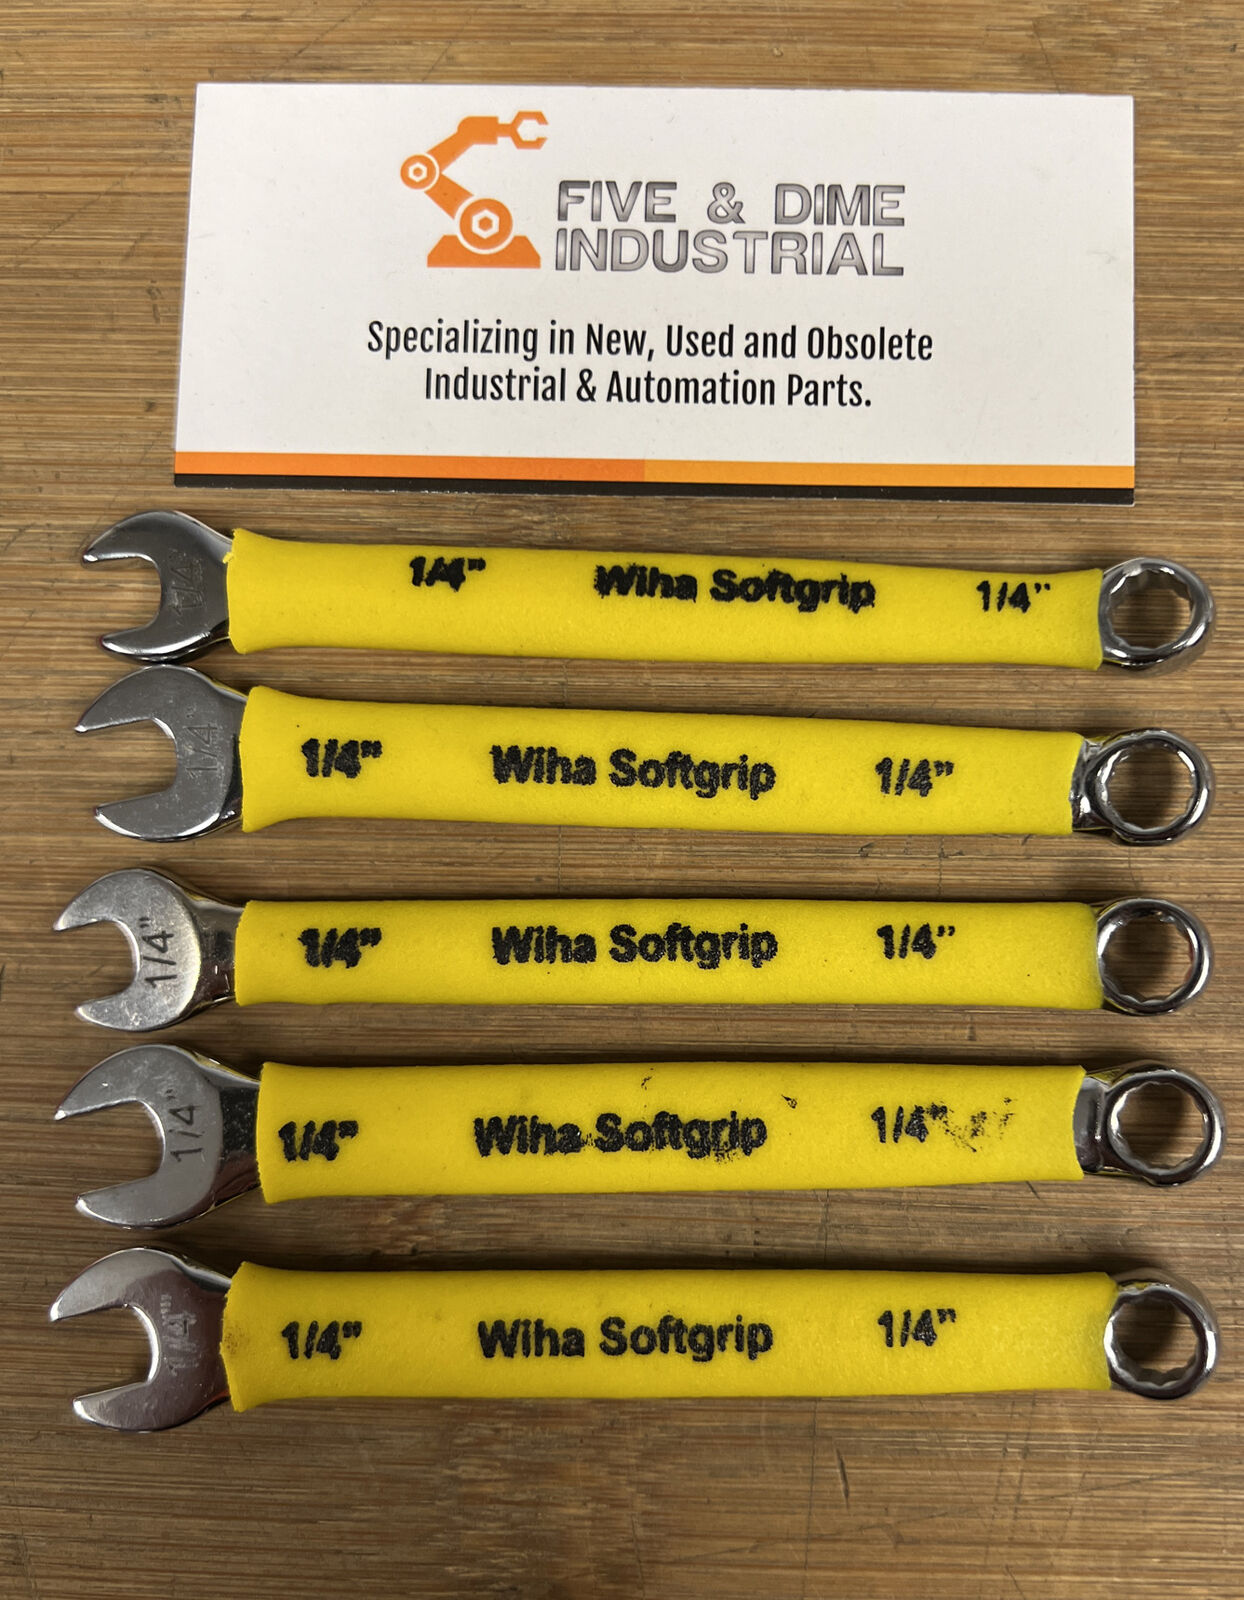 Wiha Softgrip Combination Wrench 1/4" Lot of 5 (BK111)